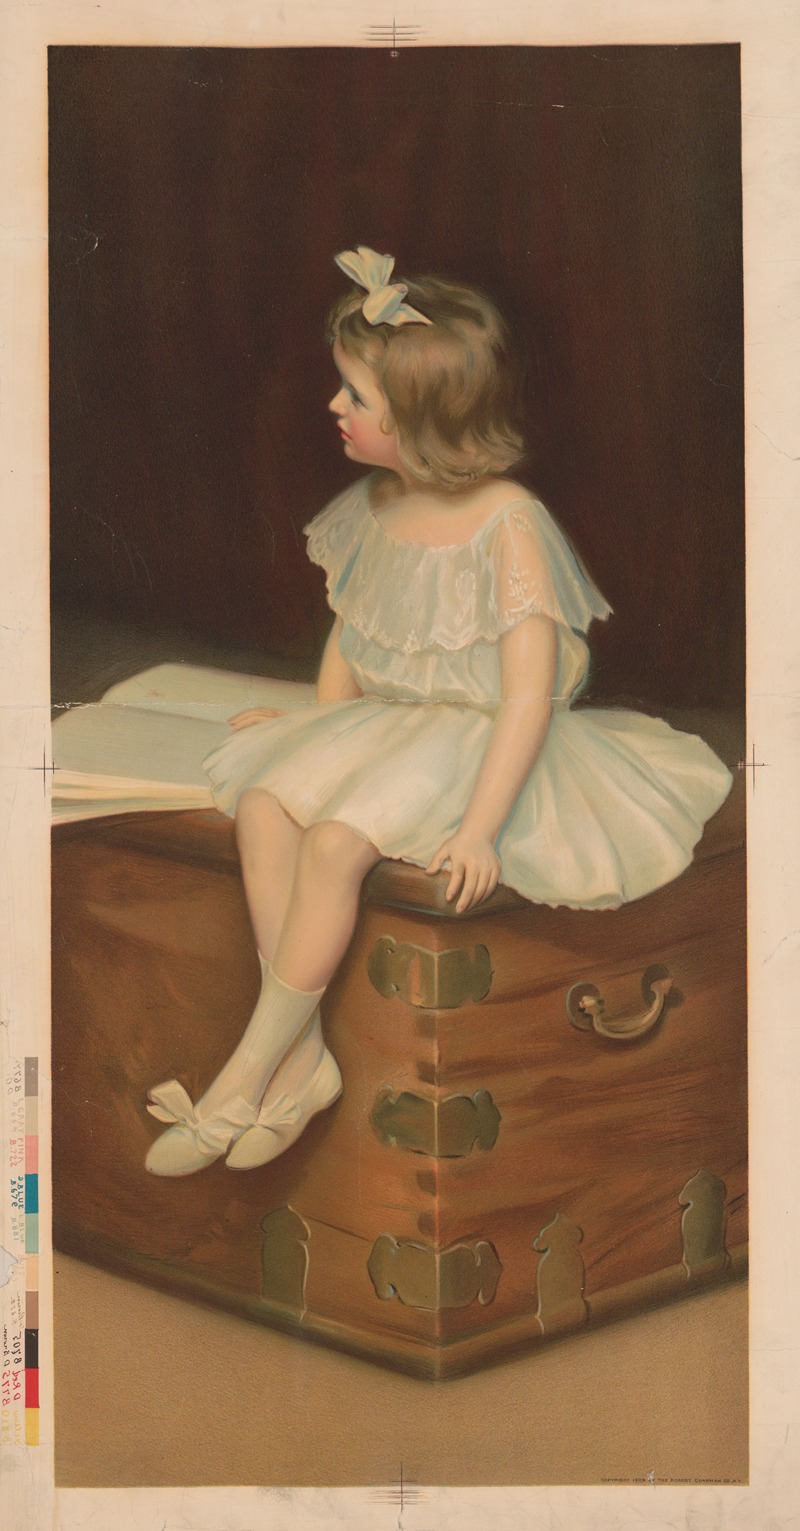 Robert Chapman Co. - Young girl, wearing a white and blue dress, sitting on a trunk reading a book